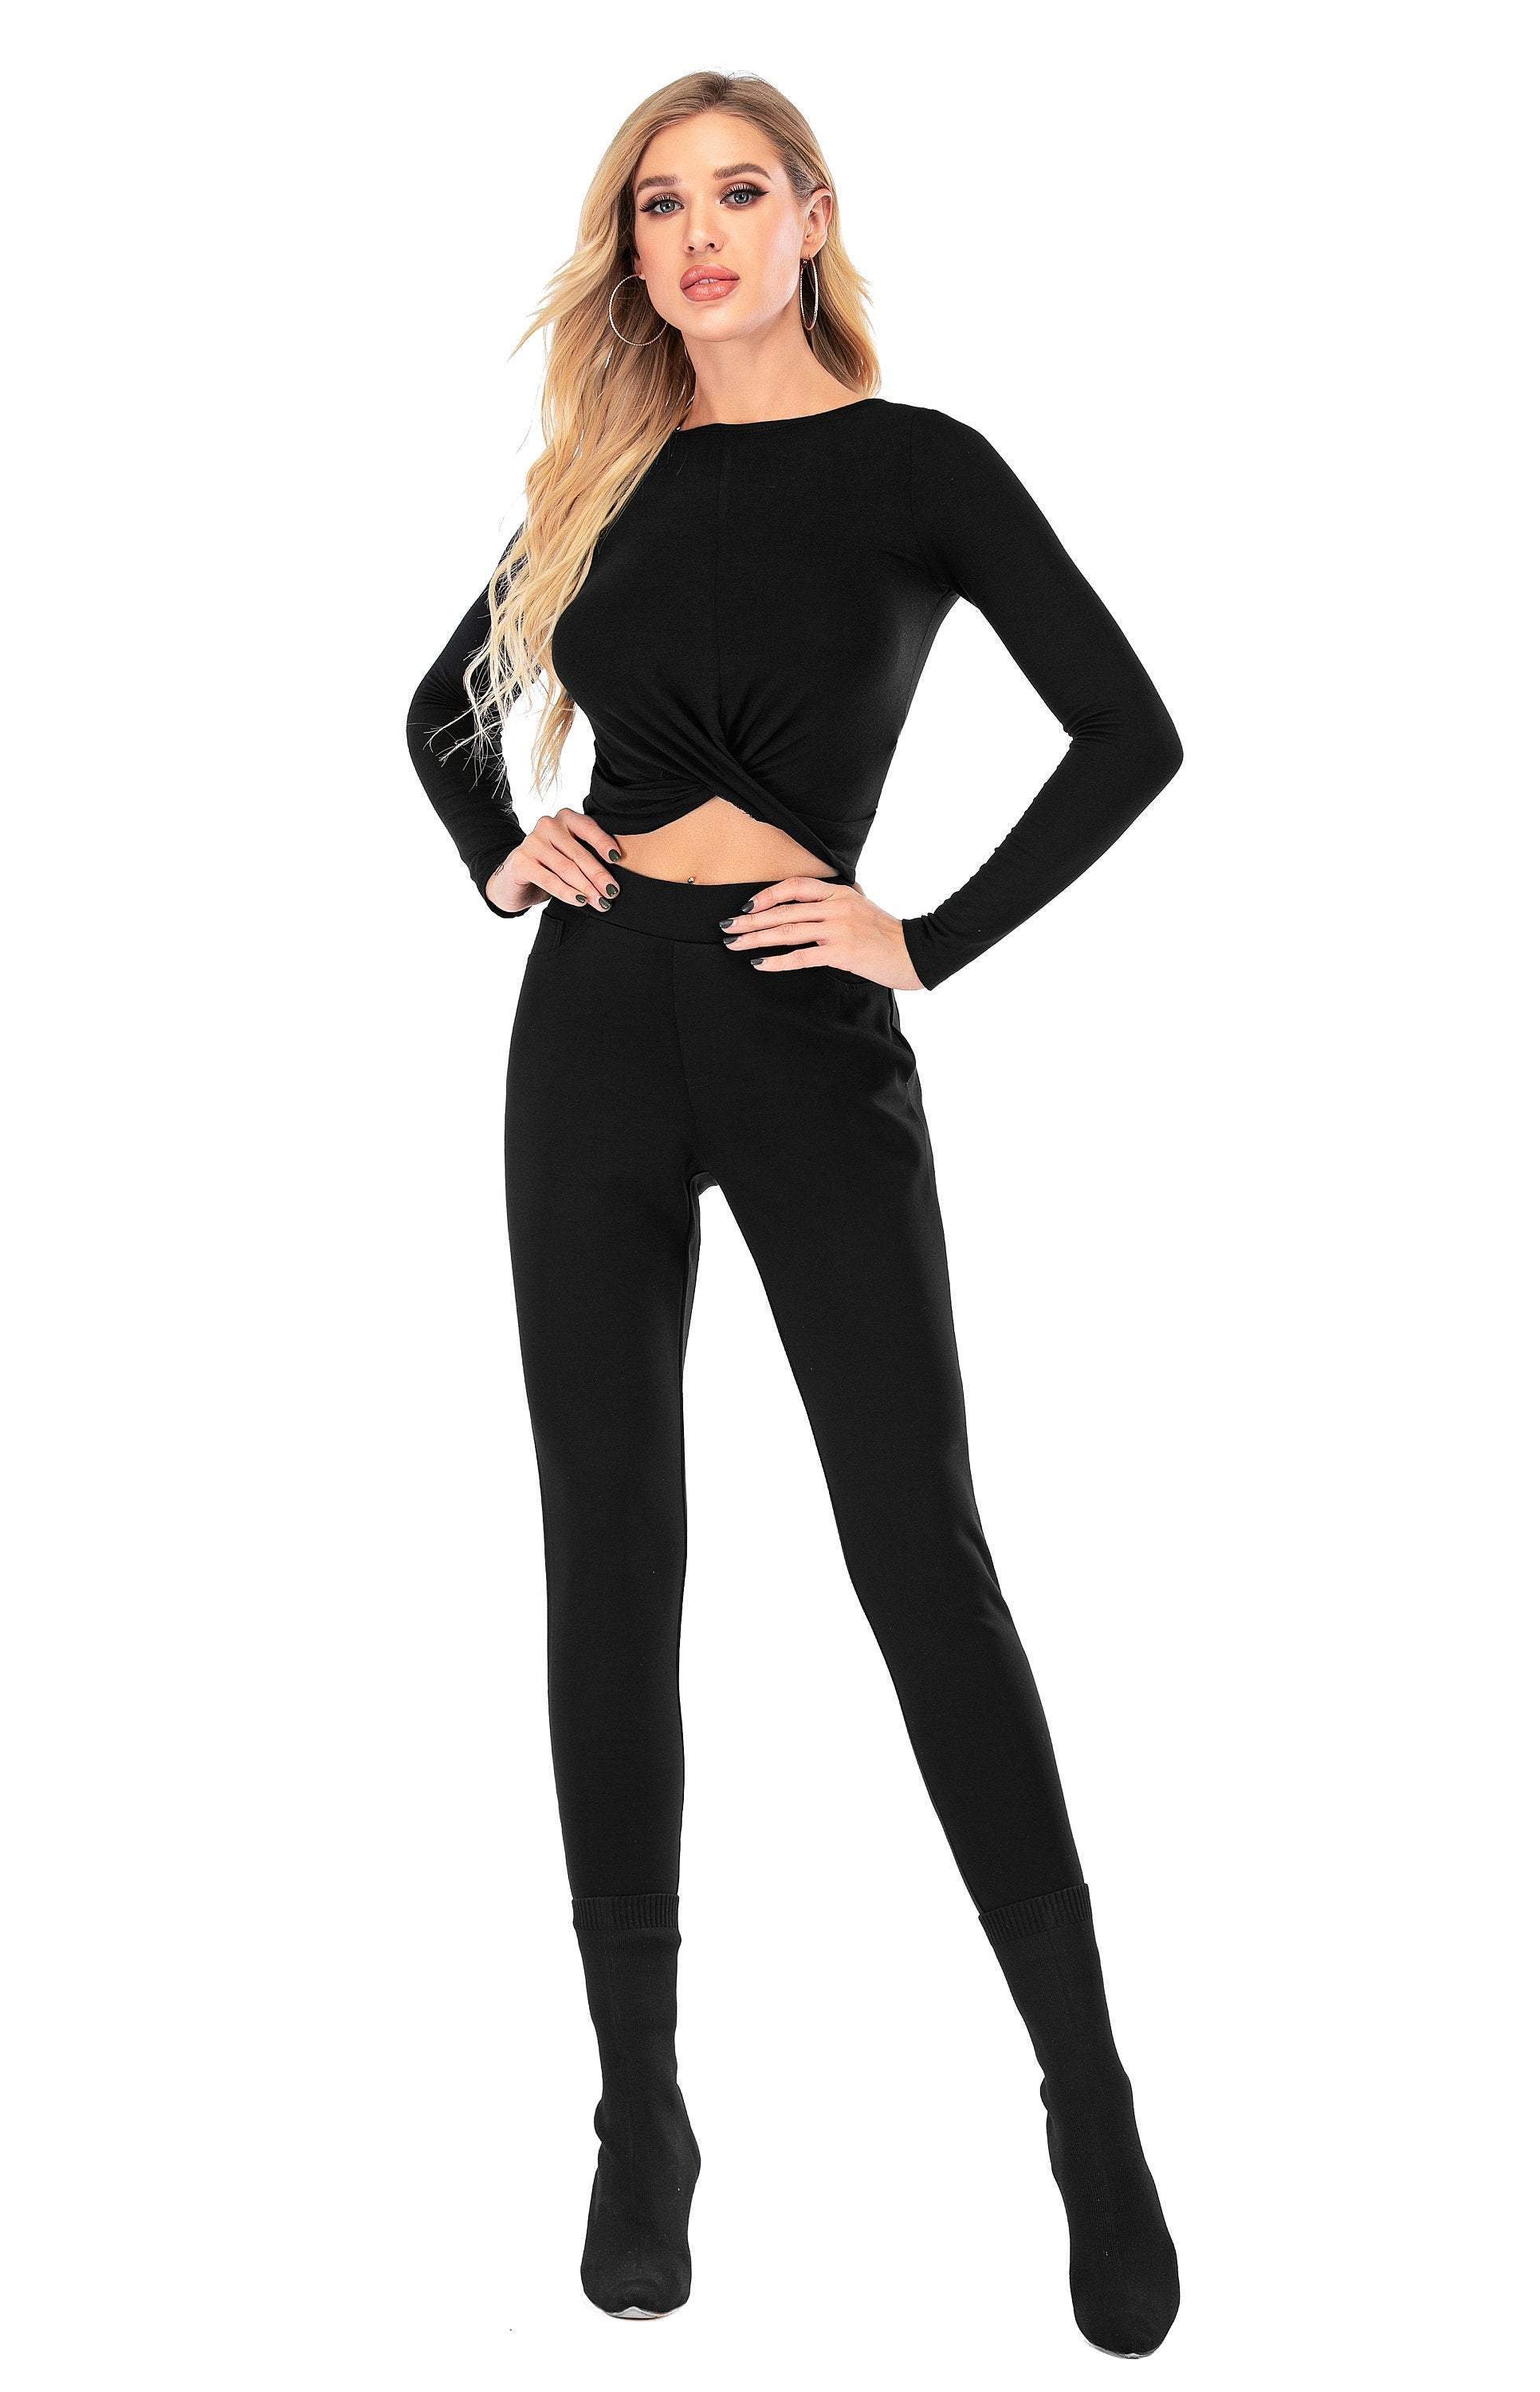 Women Yoga Front Knot Crossover Long Sleeve Top Athletic Gym Workout